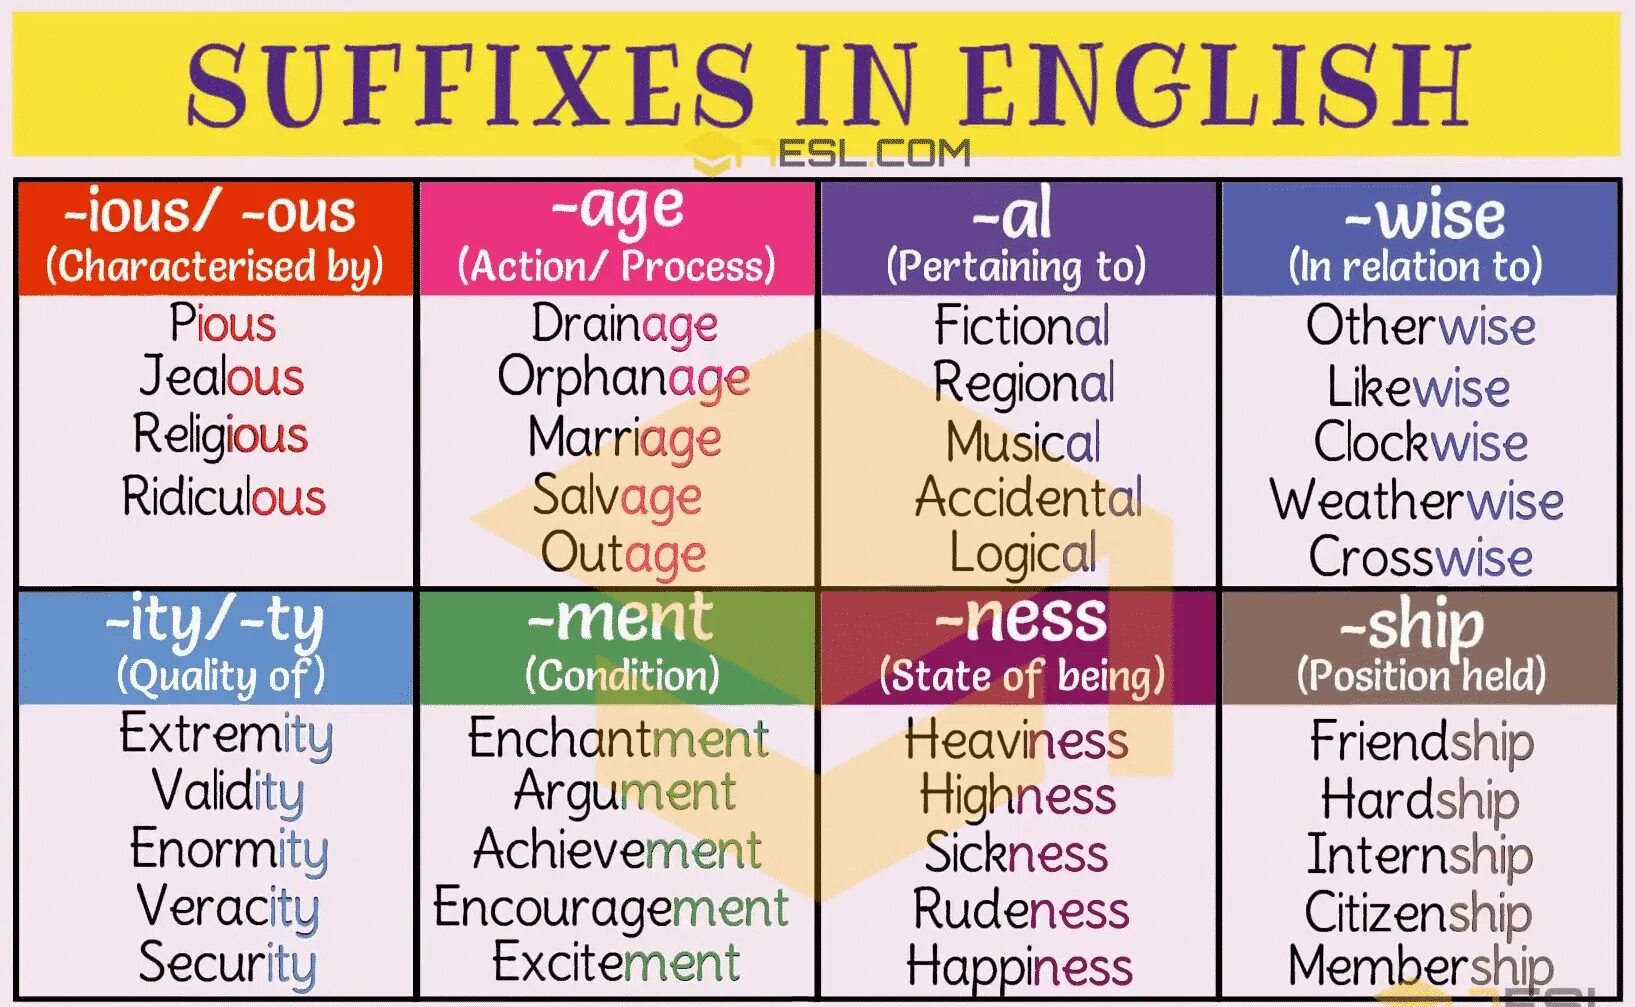 Suffixes in English. Суффикс ous в английском языке. Common suffixes. Noun suffixes list. Noun adjective suffixes